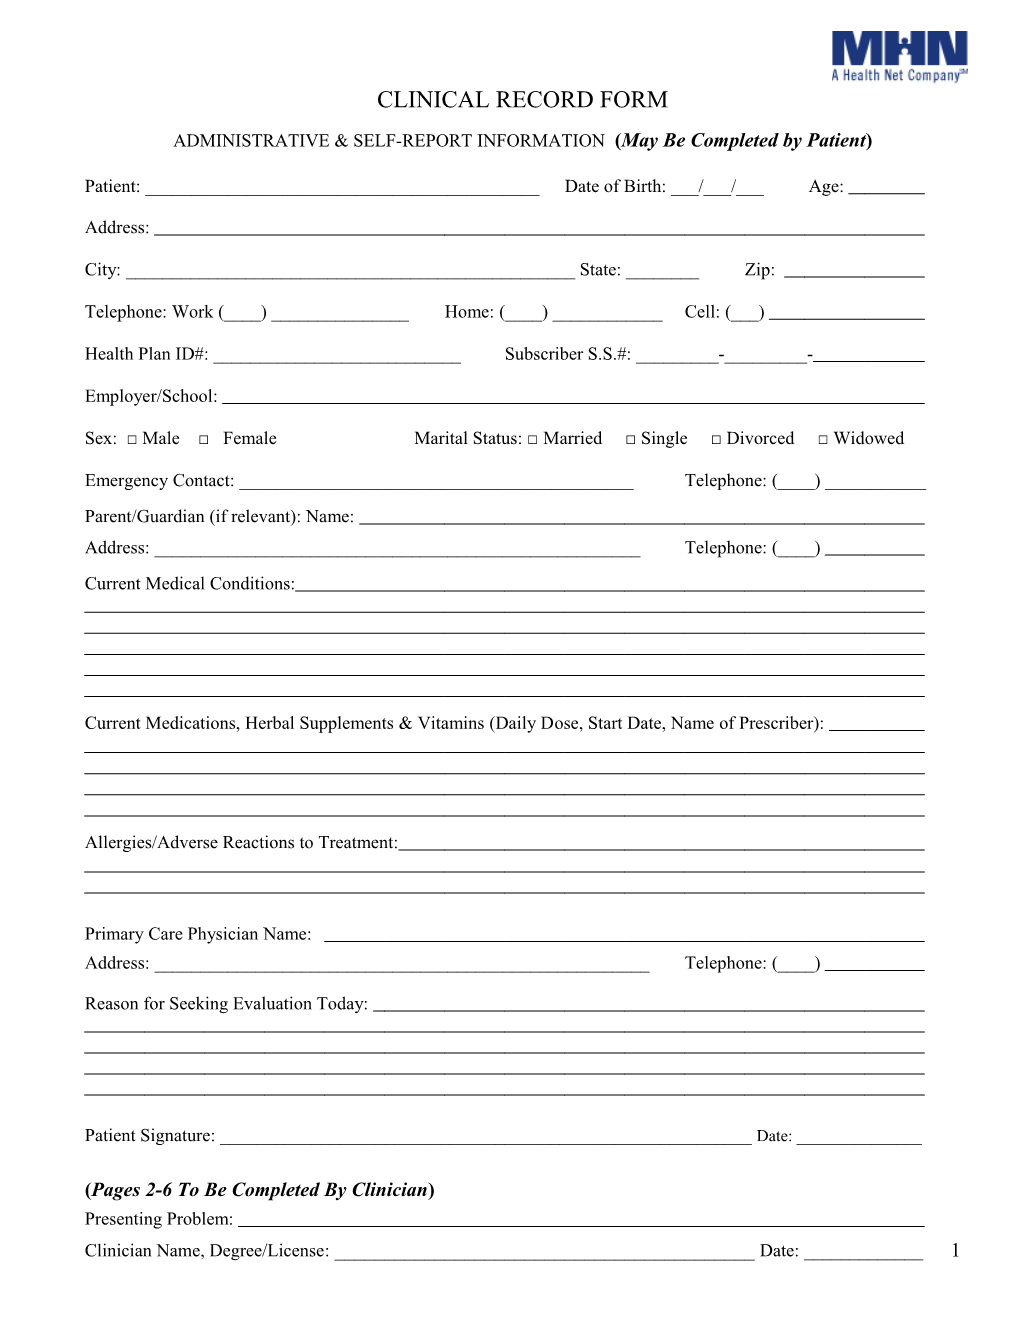 Clinical Record Form